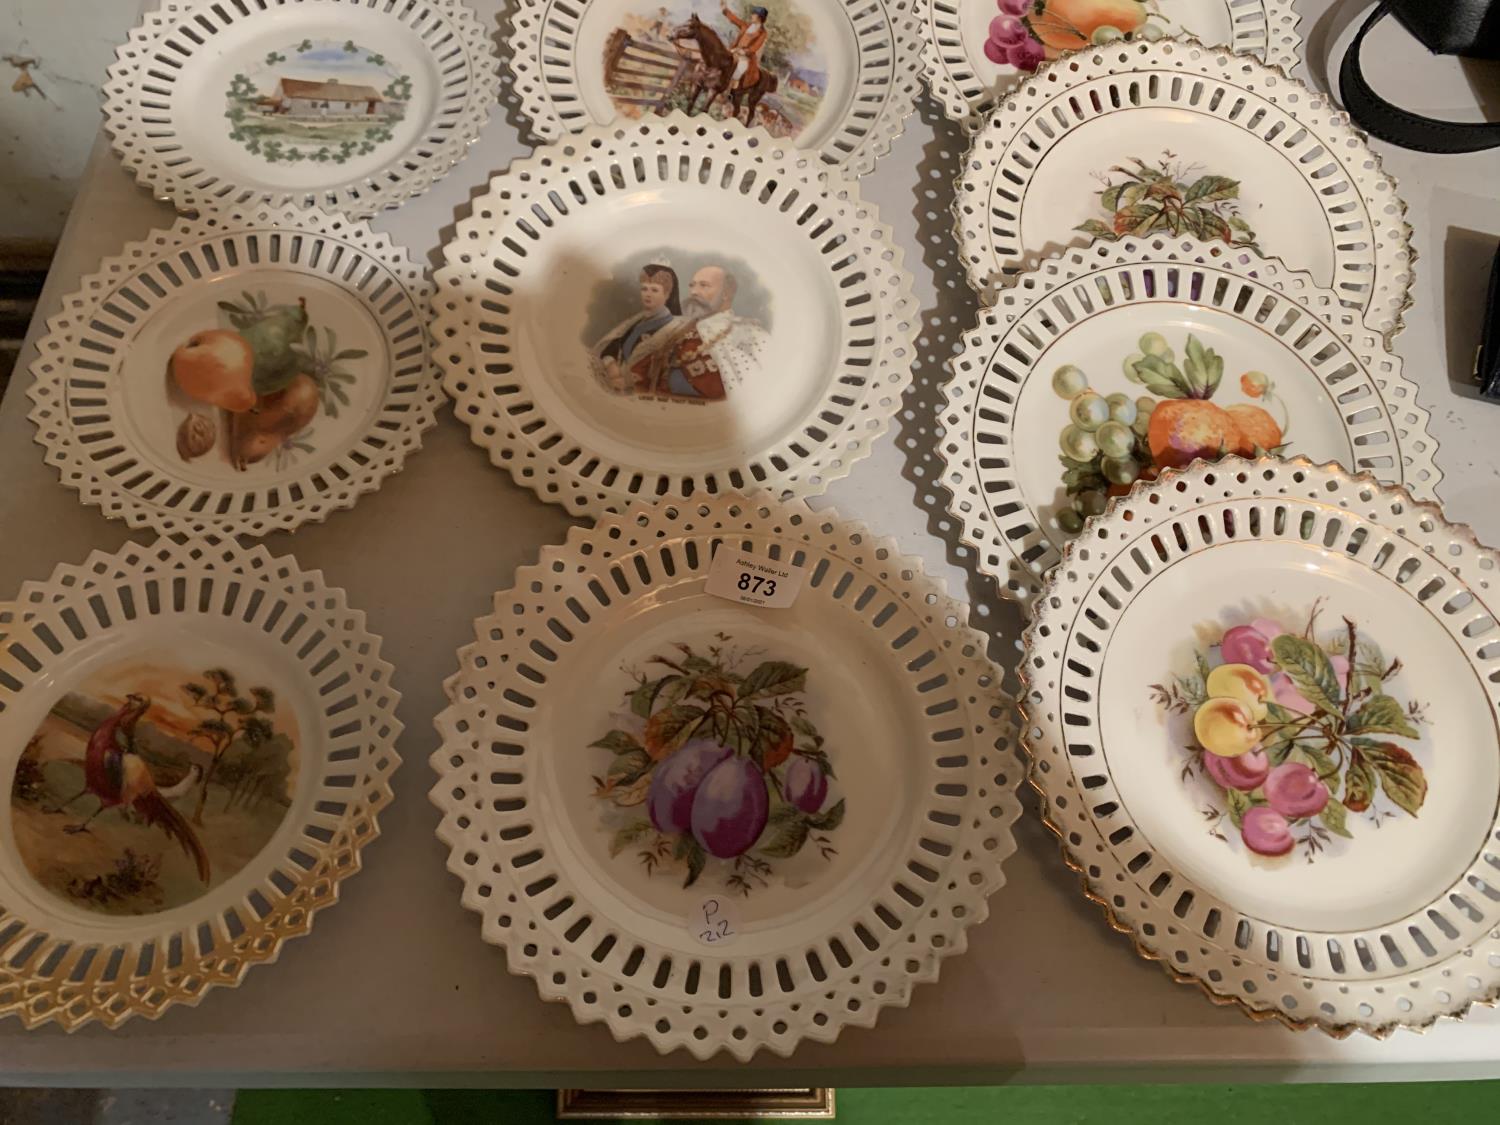 A COLLECTION OF CERAMIC PLATES WITH DECORATIVE OUTER EDGING - Image 2 of 3